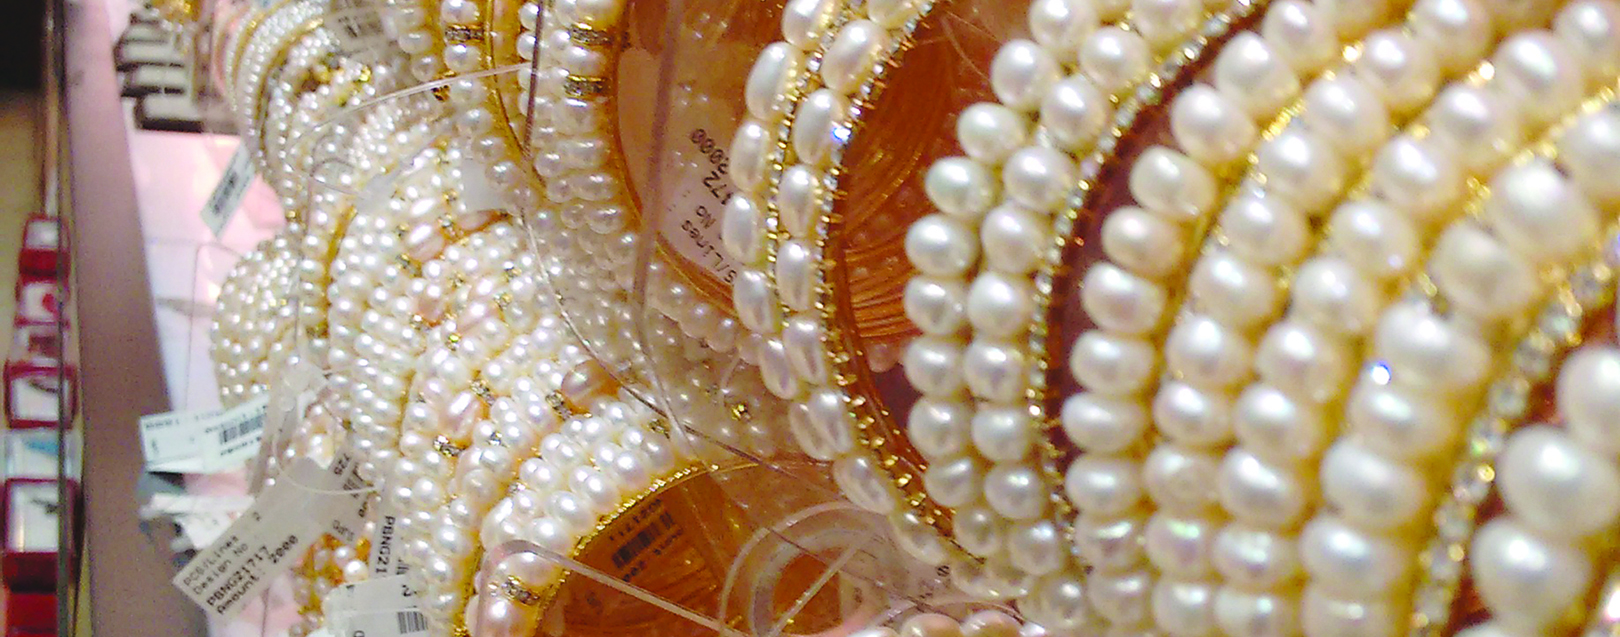 Cultured Pearls - Importing Pearls: A Gem Of An Idea March 2018 issue